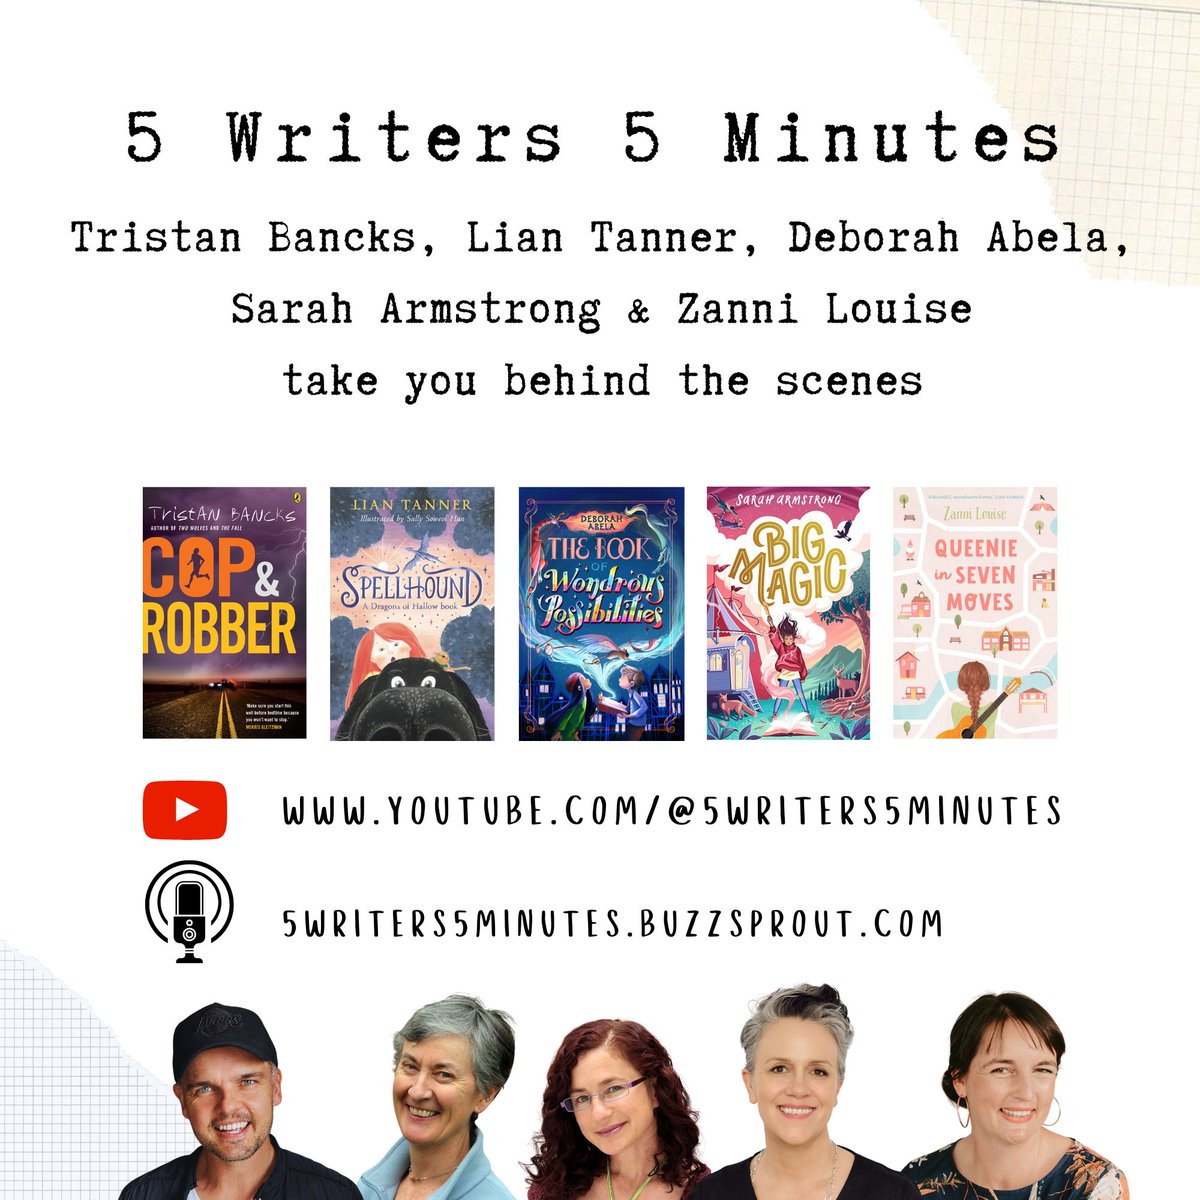 Launched today! 5 Writers 5 Minutes podcast in which I share top writing tips for kids (perfect for classroom) alongside @tanner_lian @DeborahAbela @zannilouise & Sarah Armstrong. Video version on Youtube: youtube.com/@5writers5minu… Podcast: 5writers5minutes.buzzsprout.com #podcast #kidlit